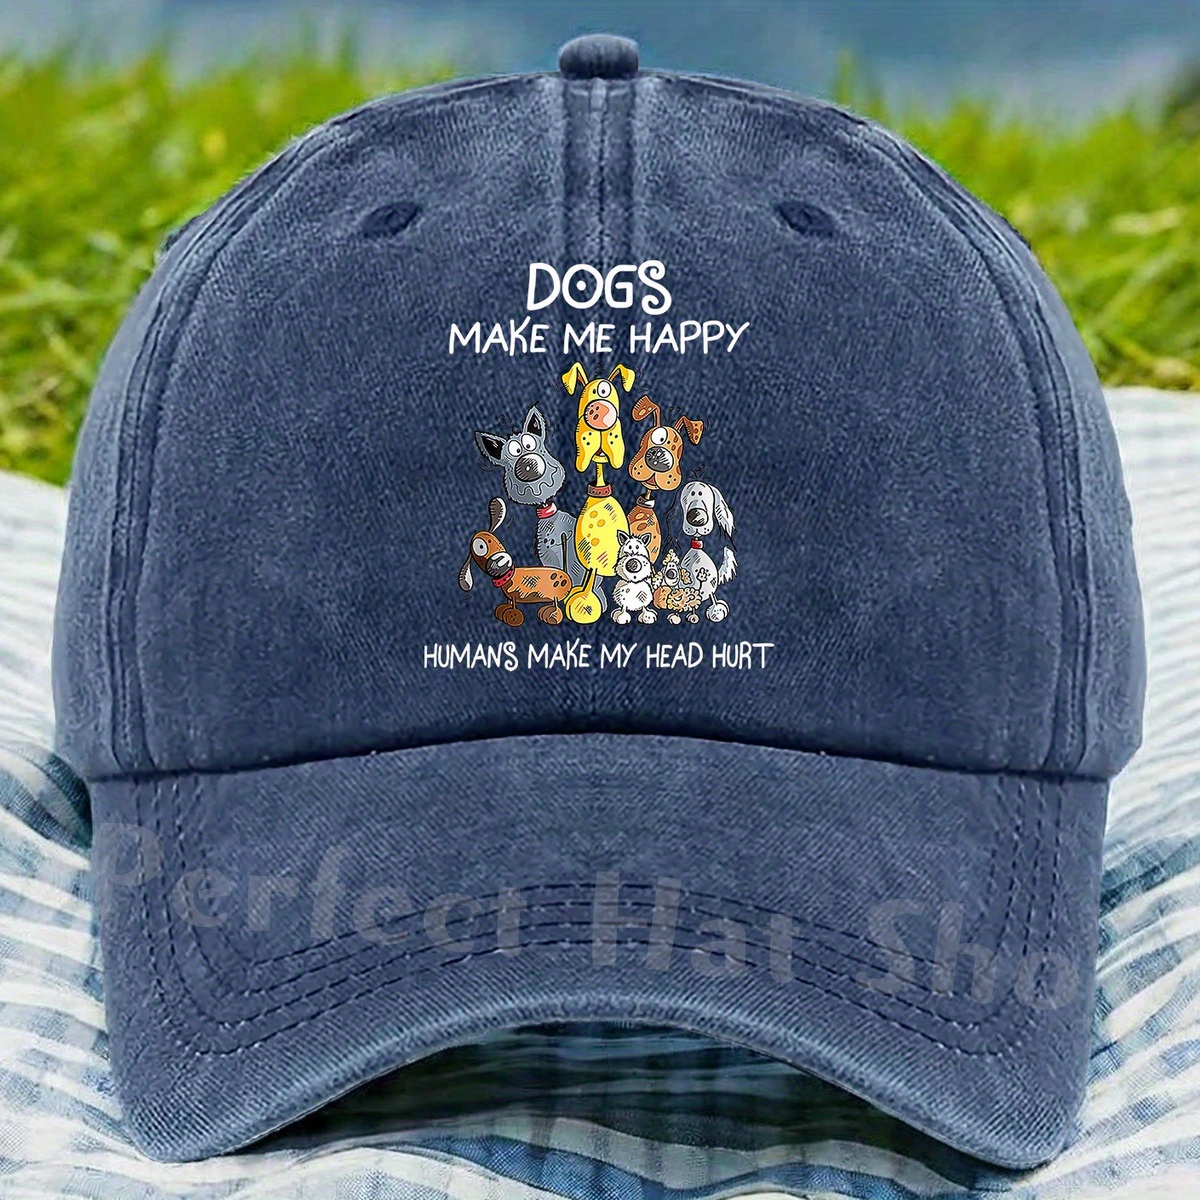 

Adjustable Cotton Baseball Cap With Dog Print And Sun Protection – "dogs Make Me Happy, Humans Make My Head Hurt" Theme – Unisex Casual Printed Hat For Outdoor Occasions With Adjustable Strap